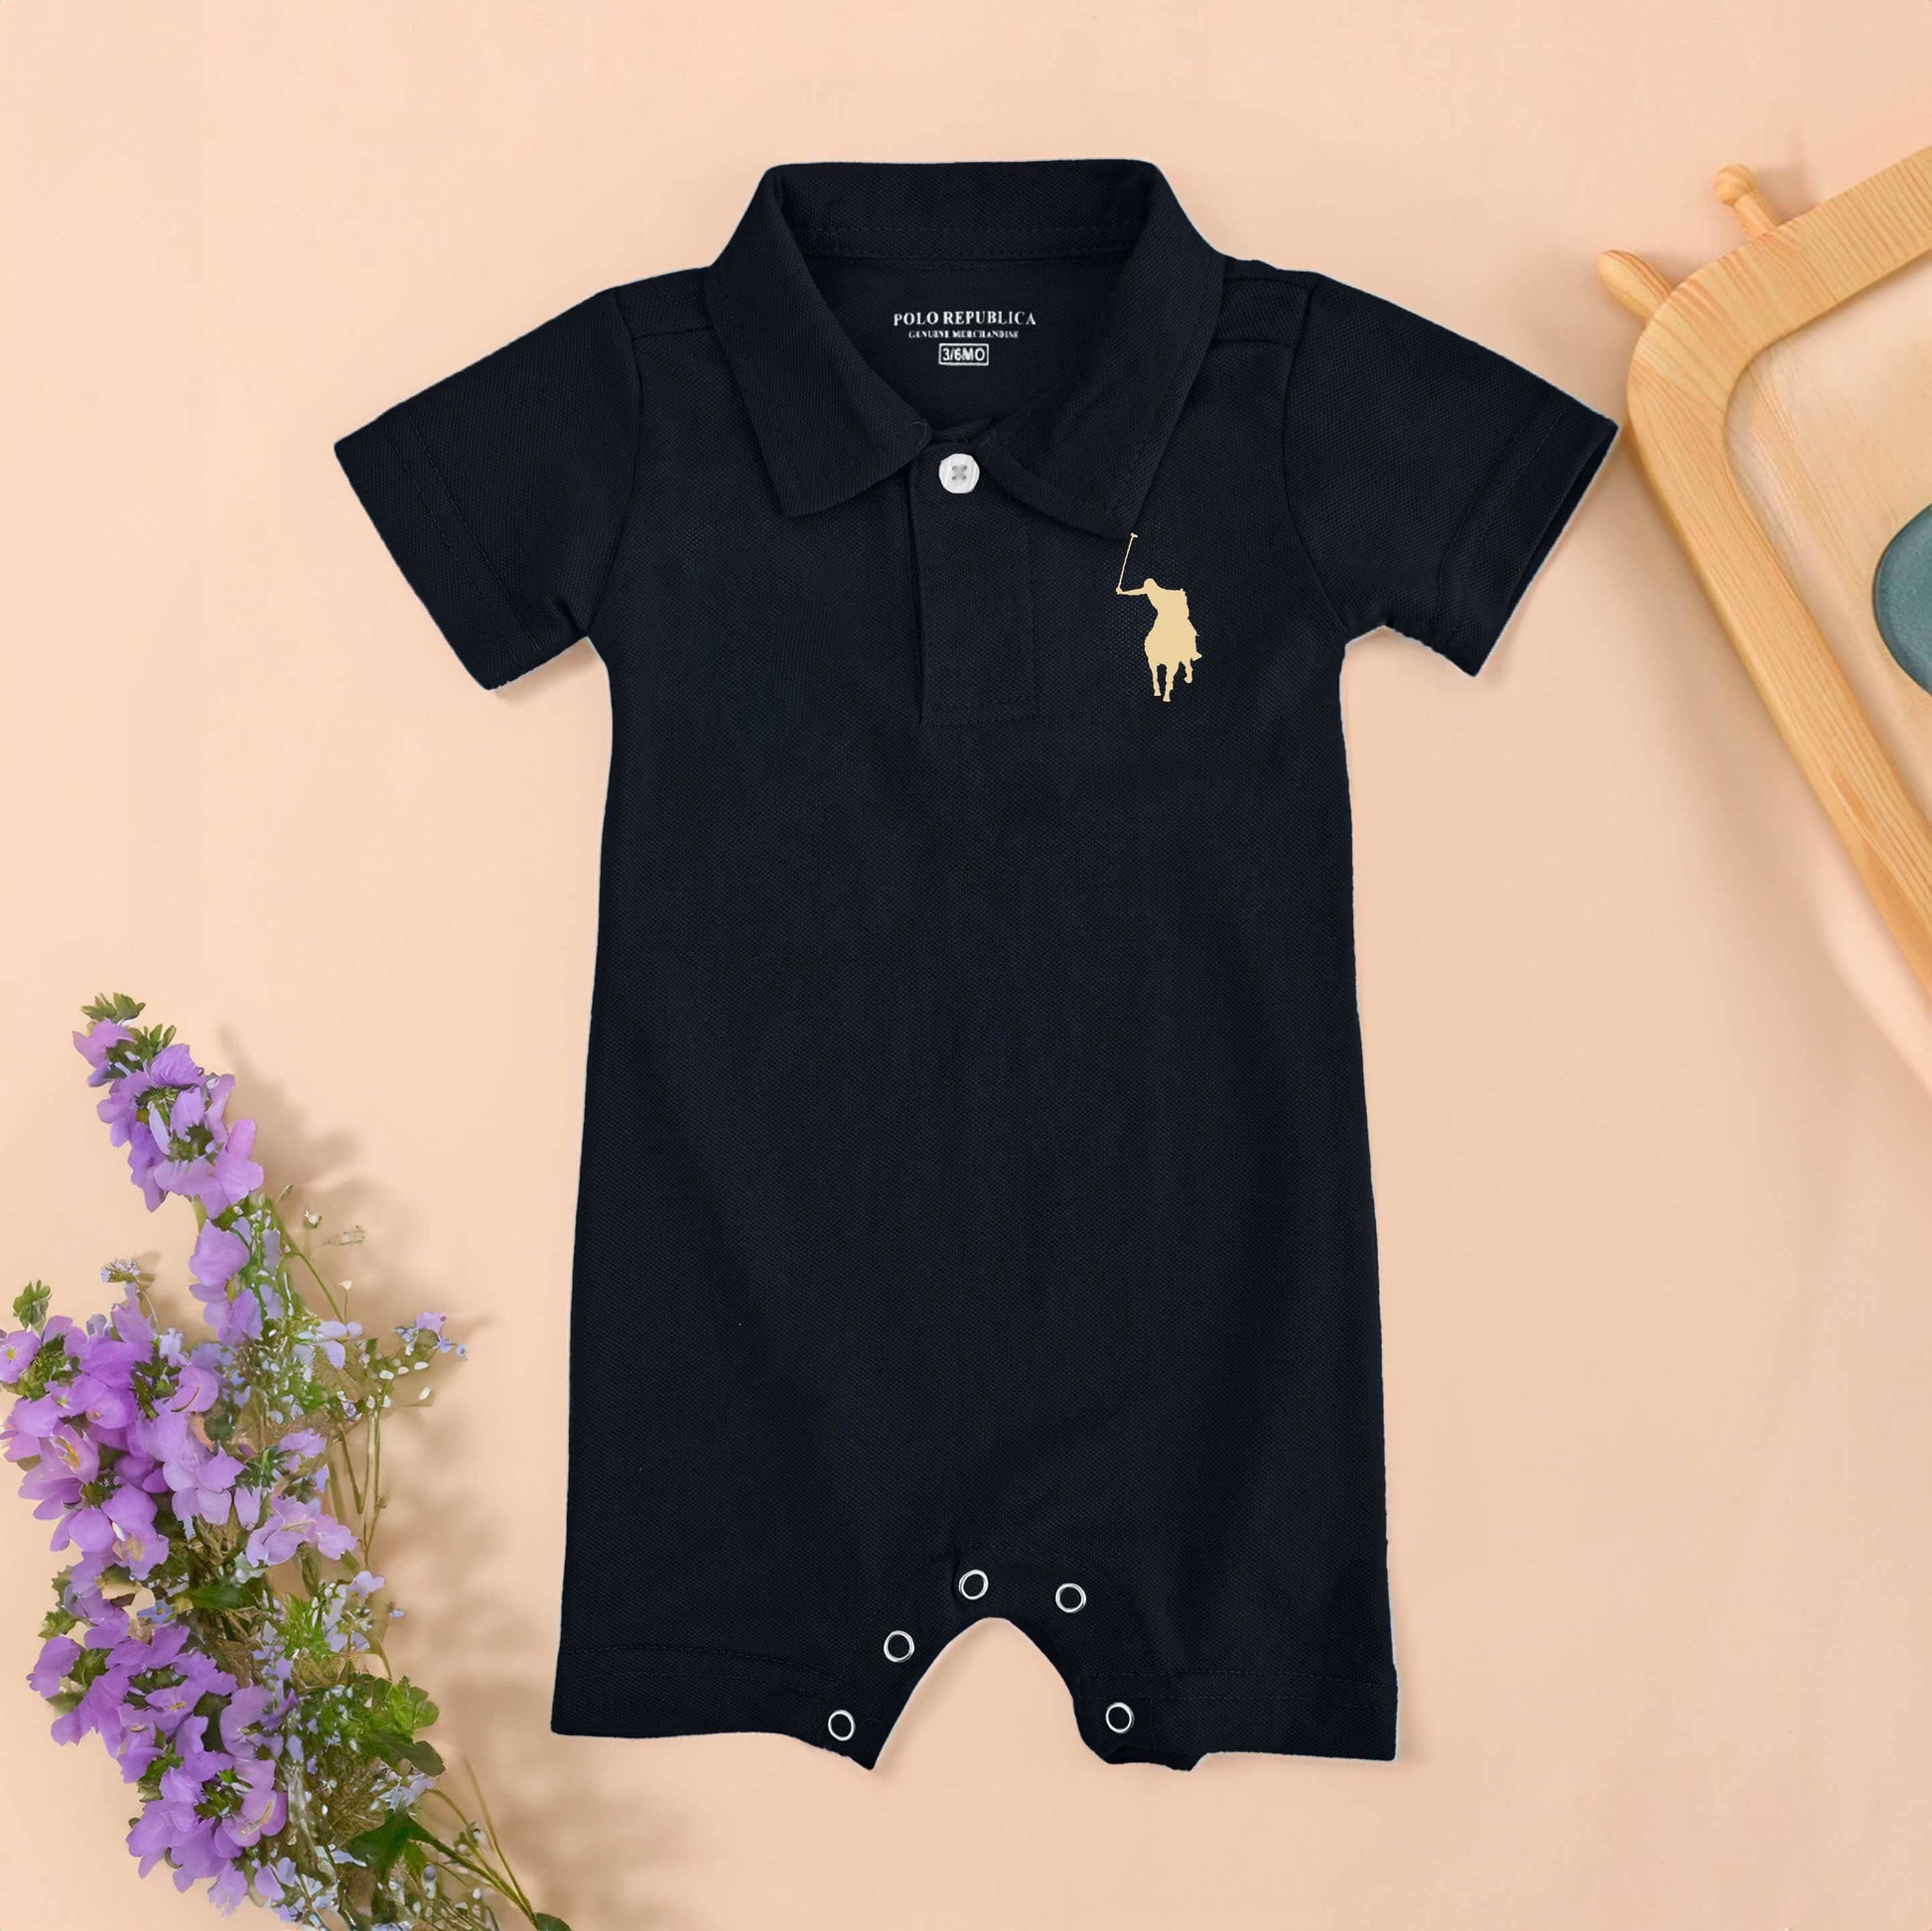 Polo Republica Signature Pony Printed Short Sleeve Baby Romper Romper Polo Republica Navy 0-3 Months 